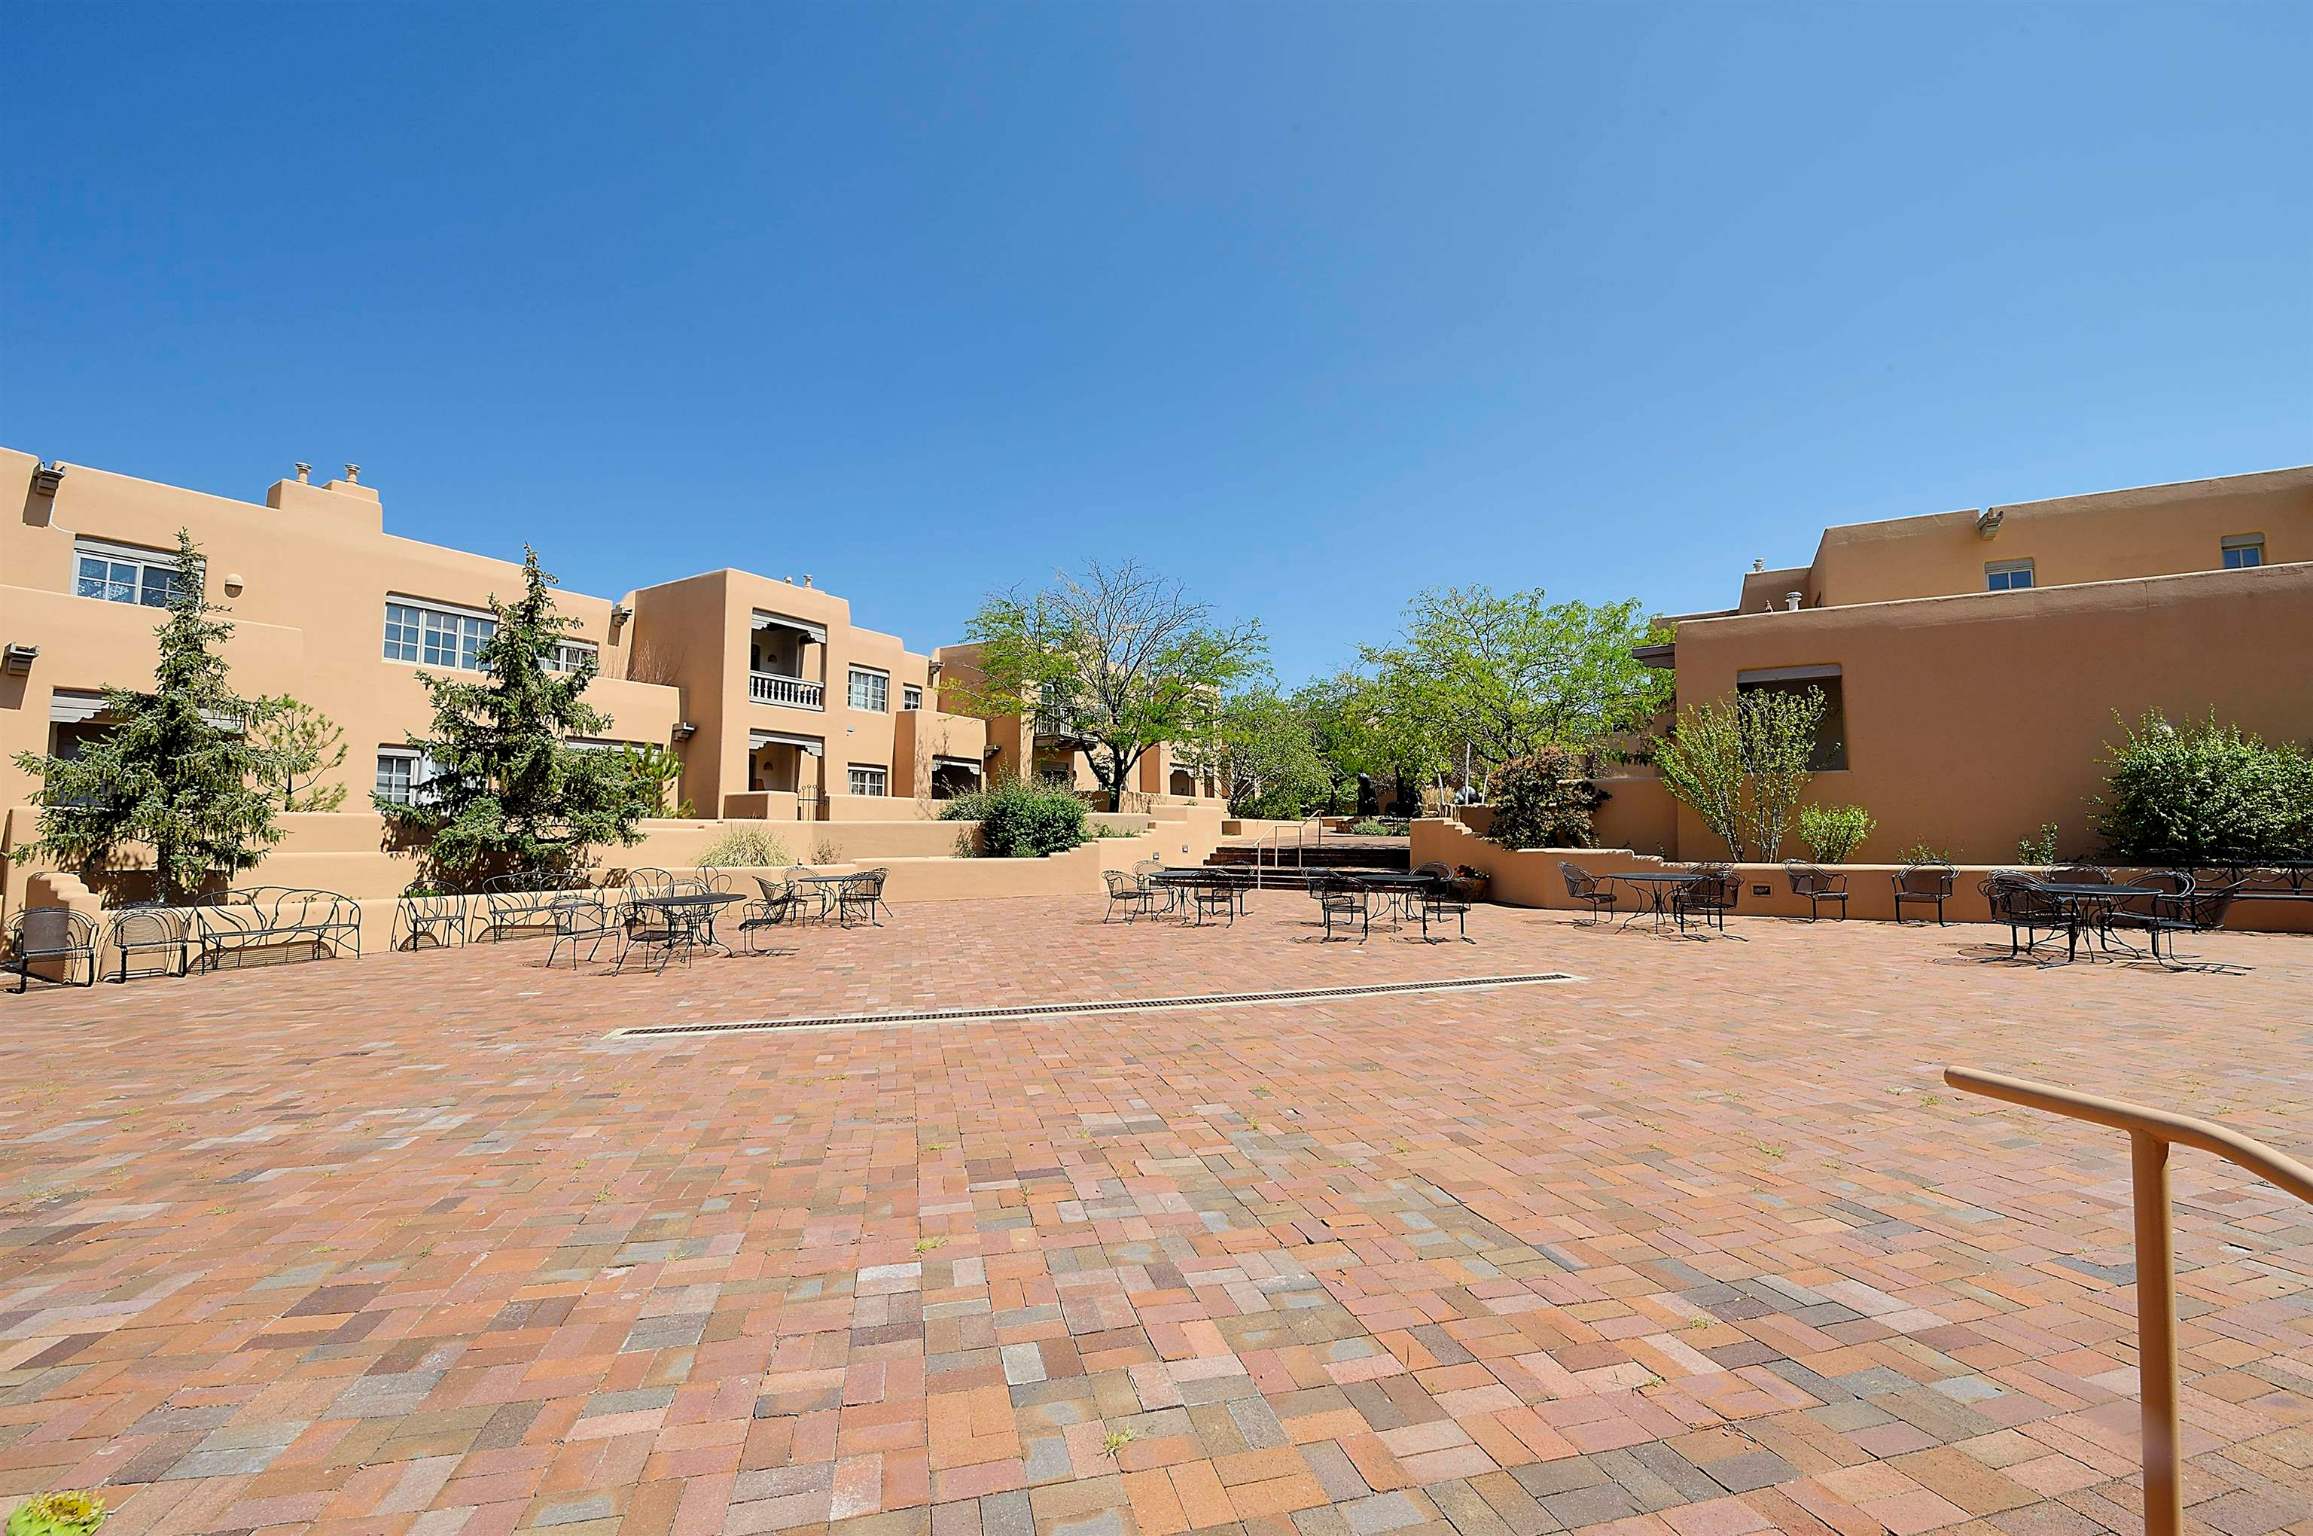 3101 Old Pecos Trail Unit 112, Santa Fe, New Mexico 87505-9078, 2 Bedrooms Bedrooms, ,2 BathroomsBathrooms,Residential,For Sale,3101 Old Pecos Trail Unit 112,202104167